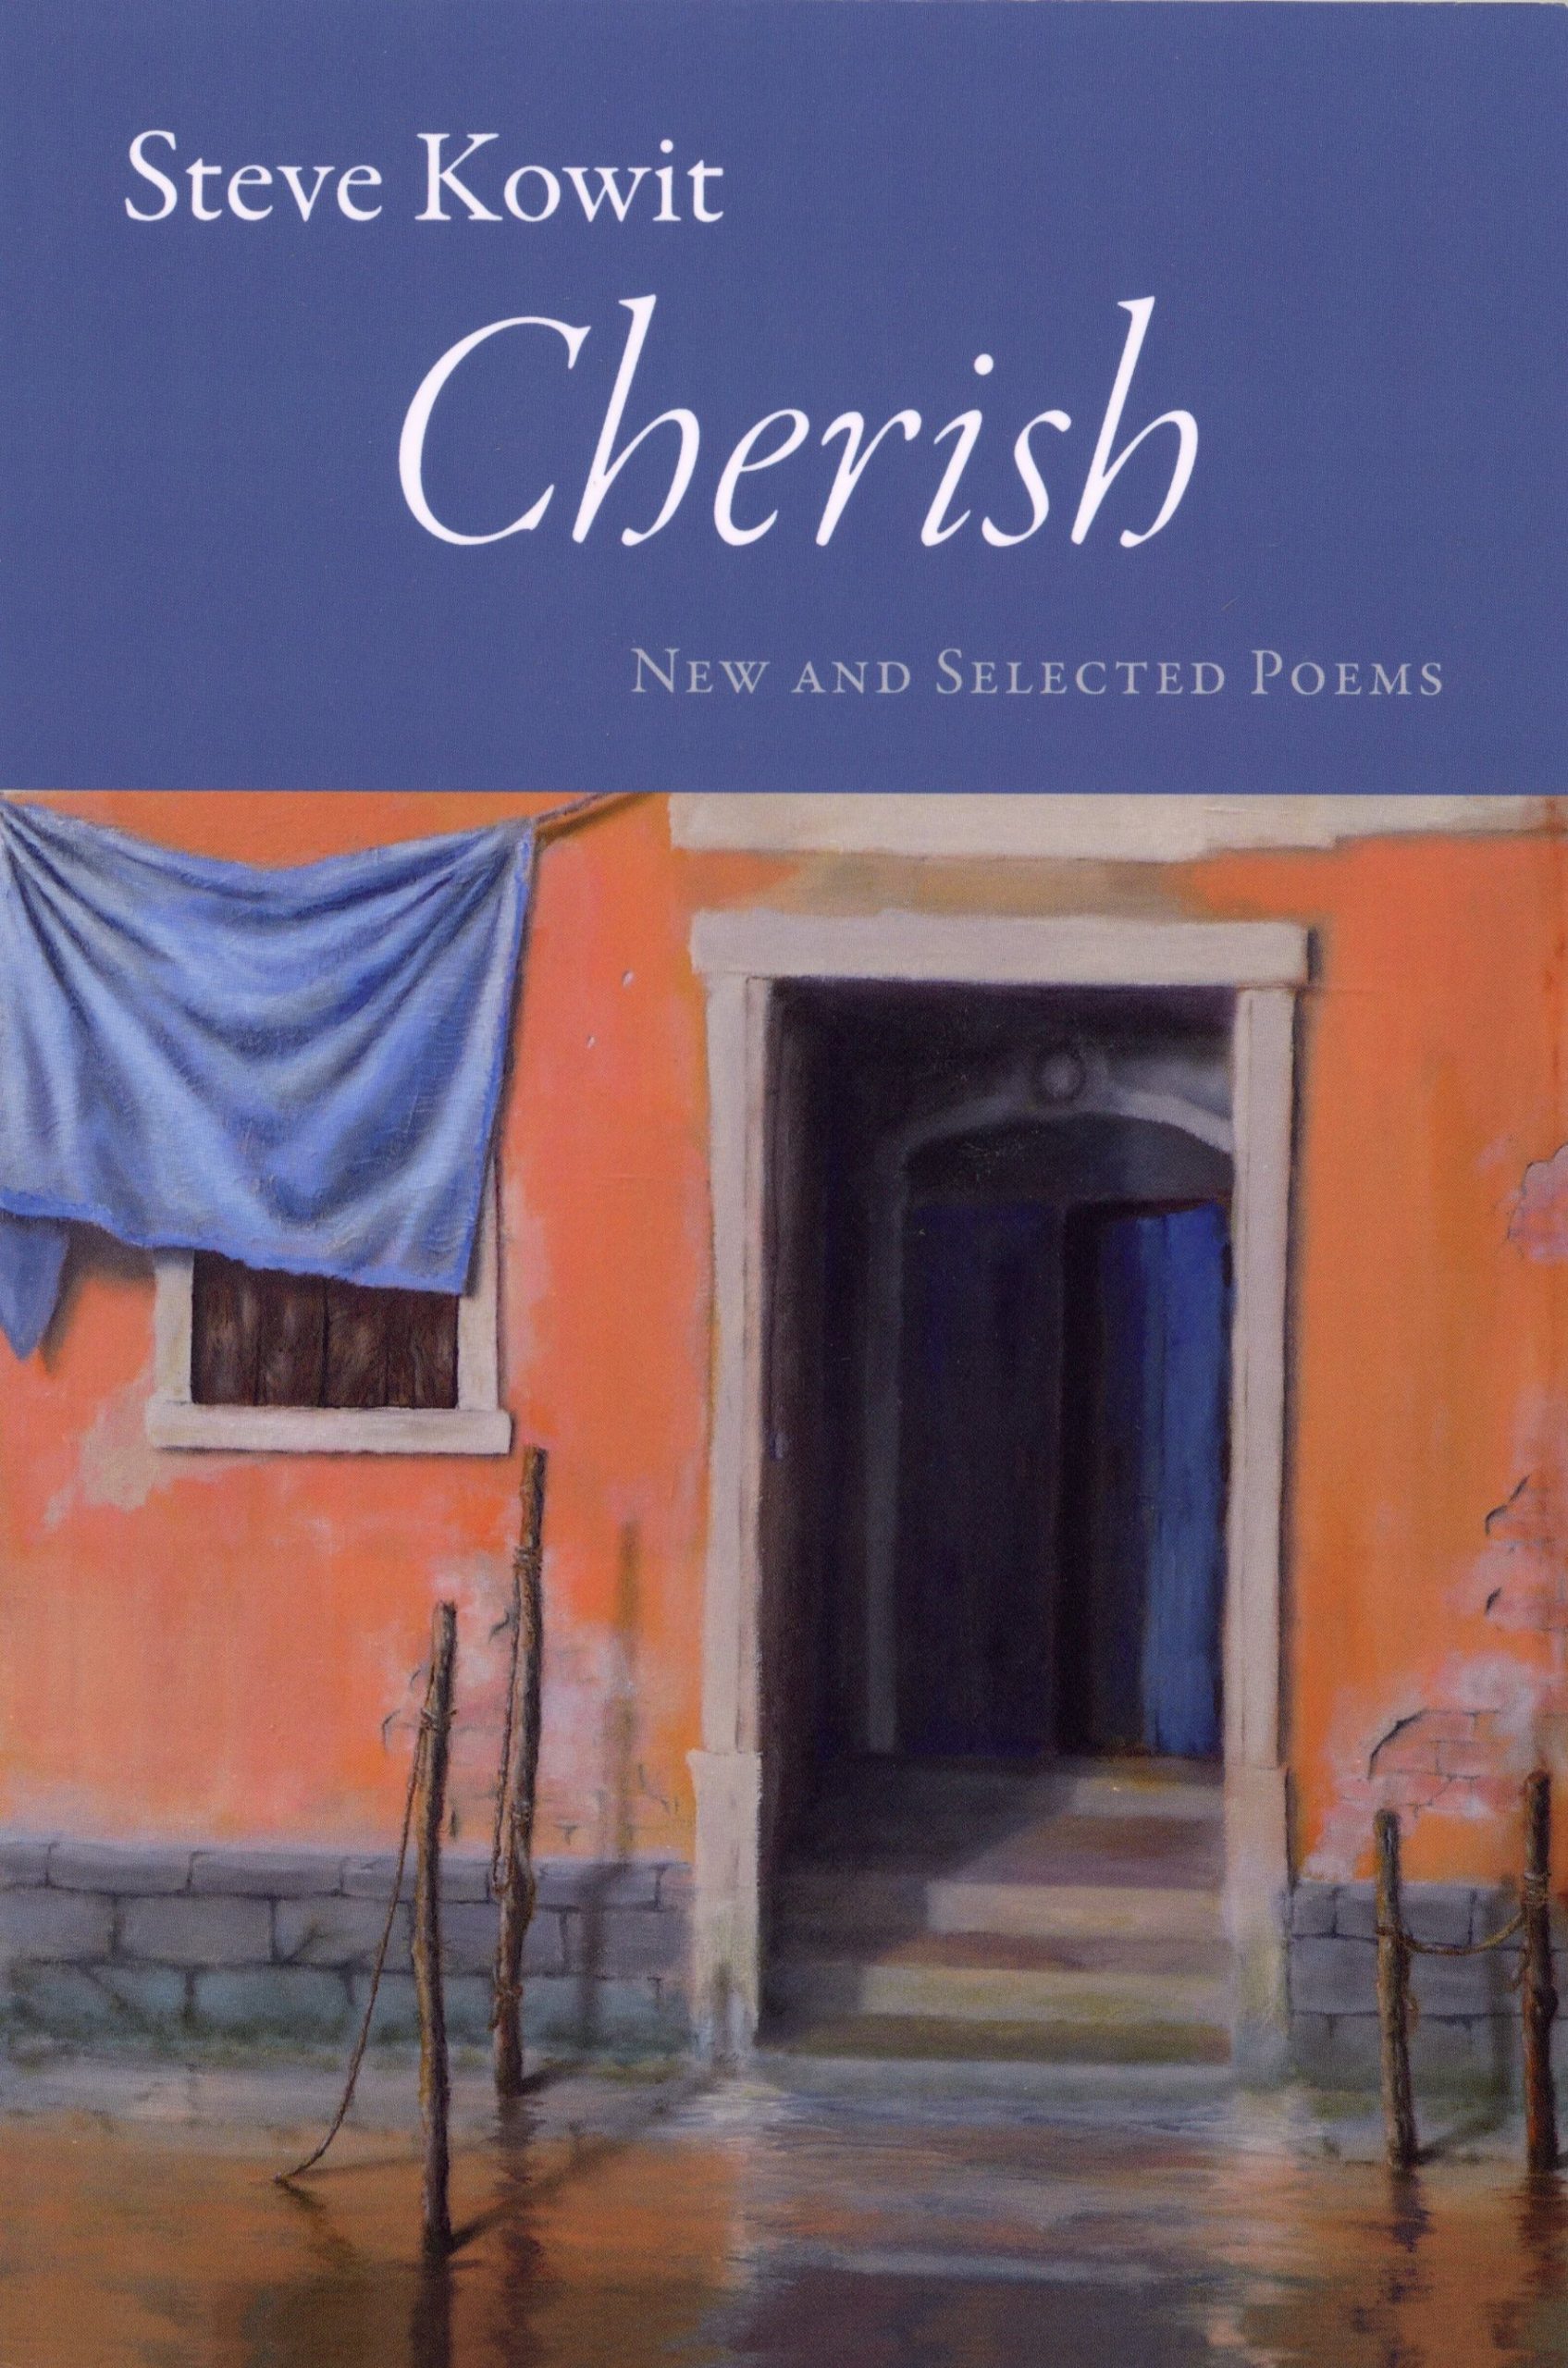 Image of the front cover of Cherish.